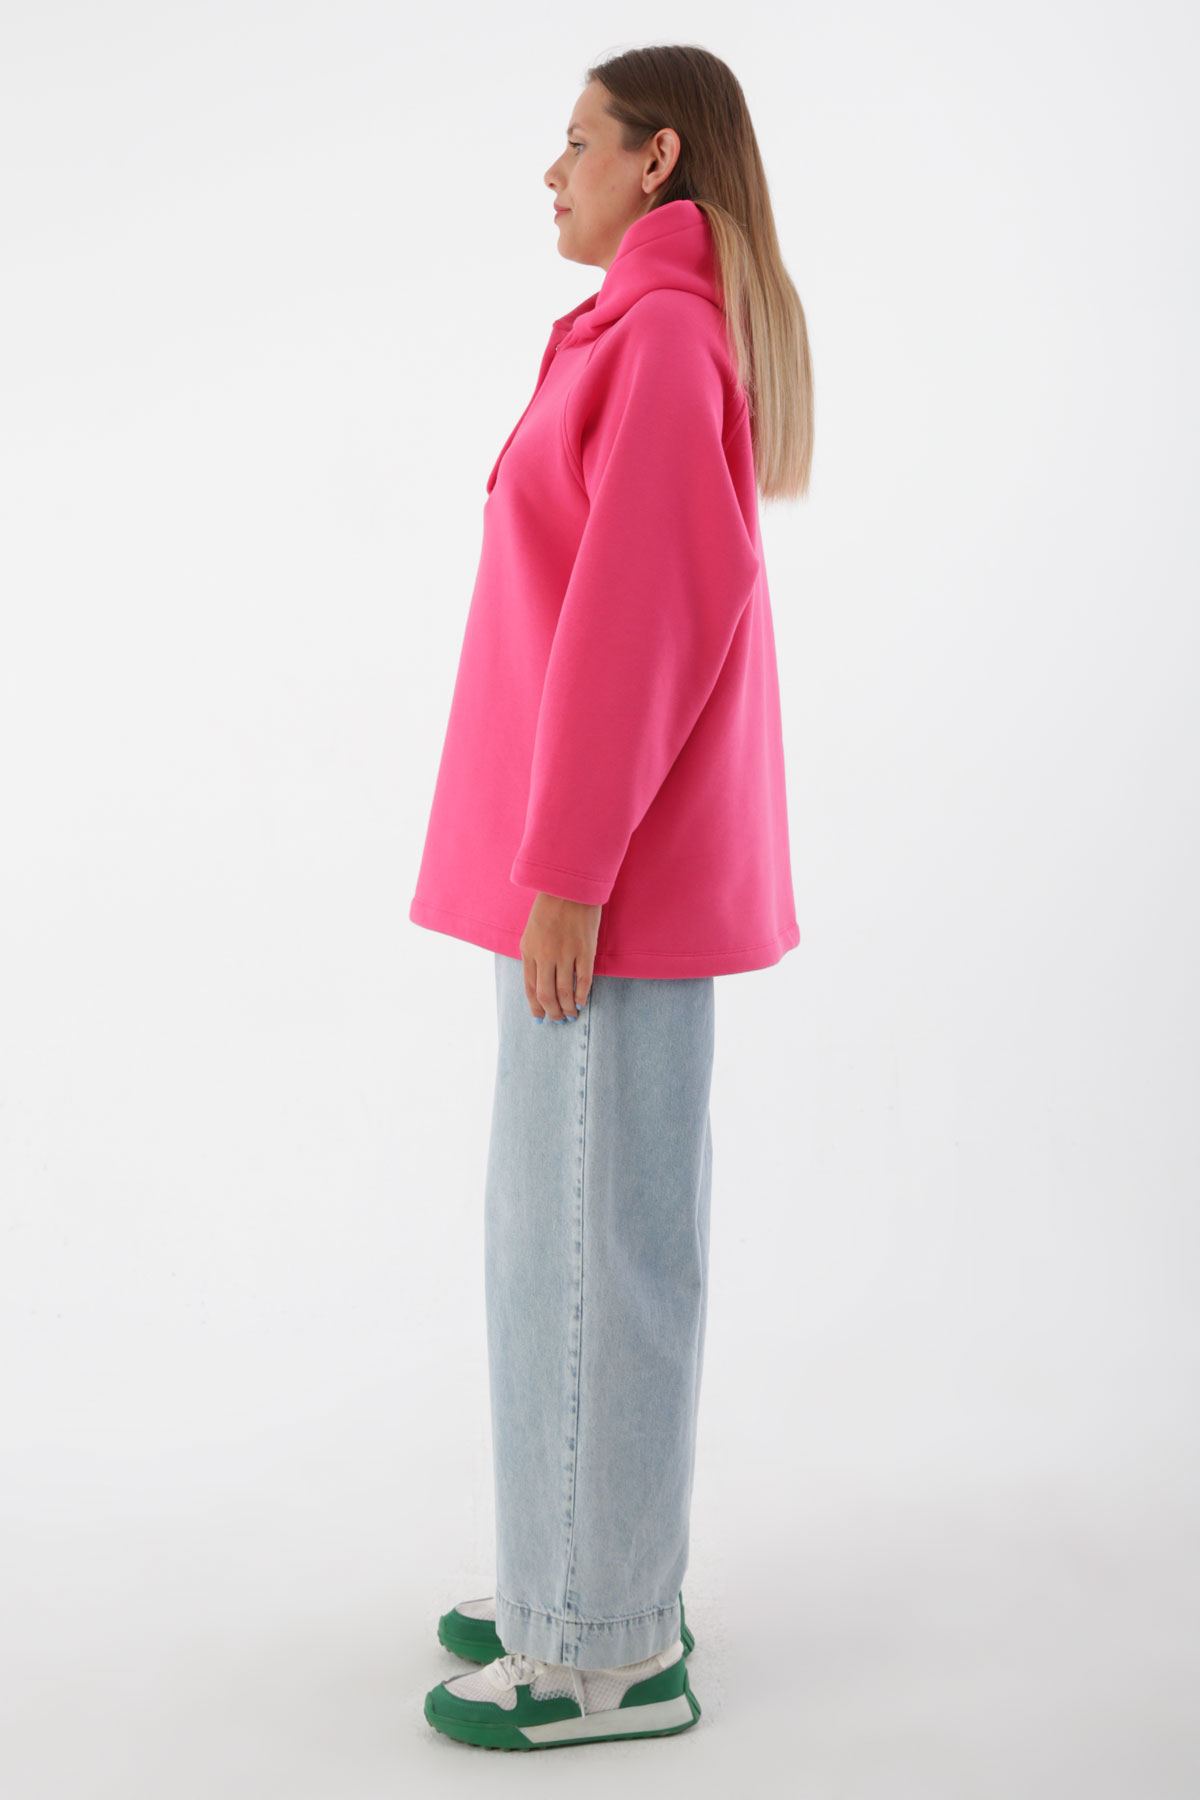 A wholesale clothing model wears all11881-comfortable-fit-sweat-tunic-with-accessory-detail-on-the-collar-fuchsia, Turkish wholesale Sweatshirt of Allday